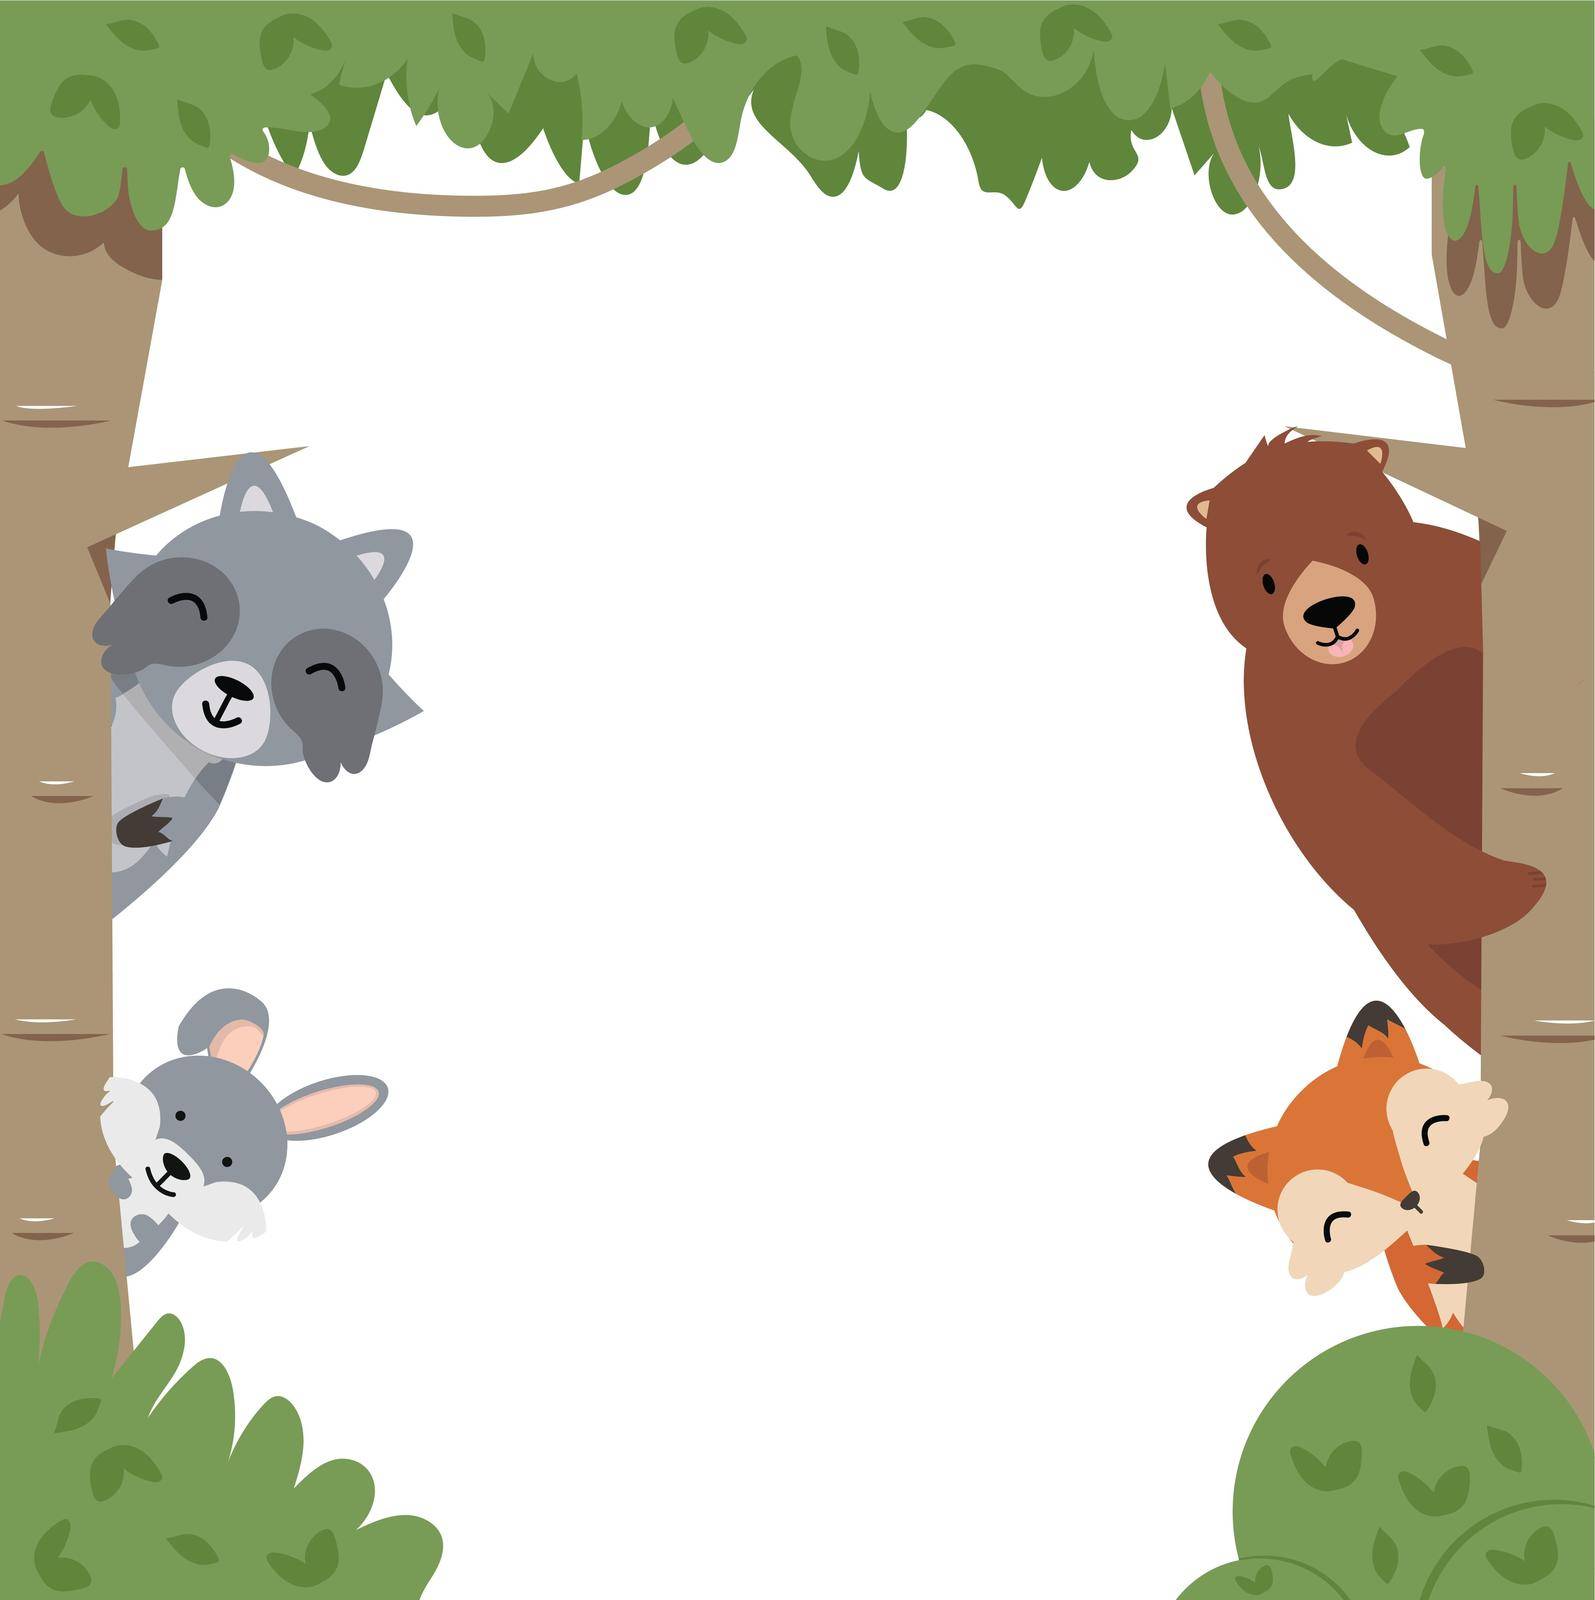 Animals flat Jungle landscape background by focus_bell